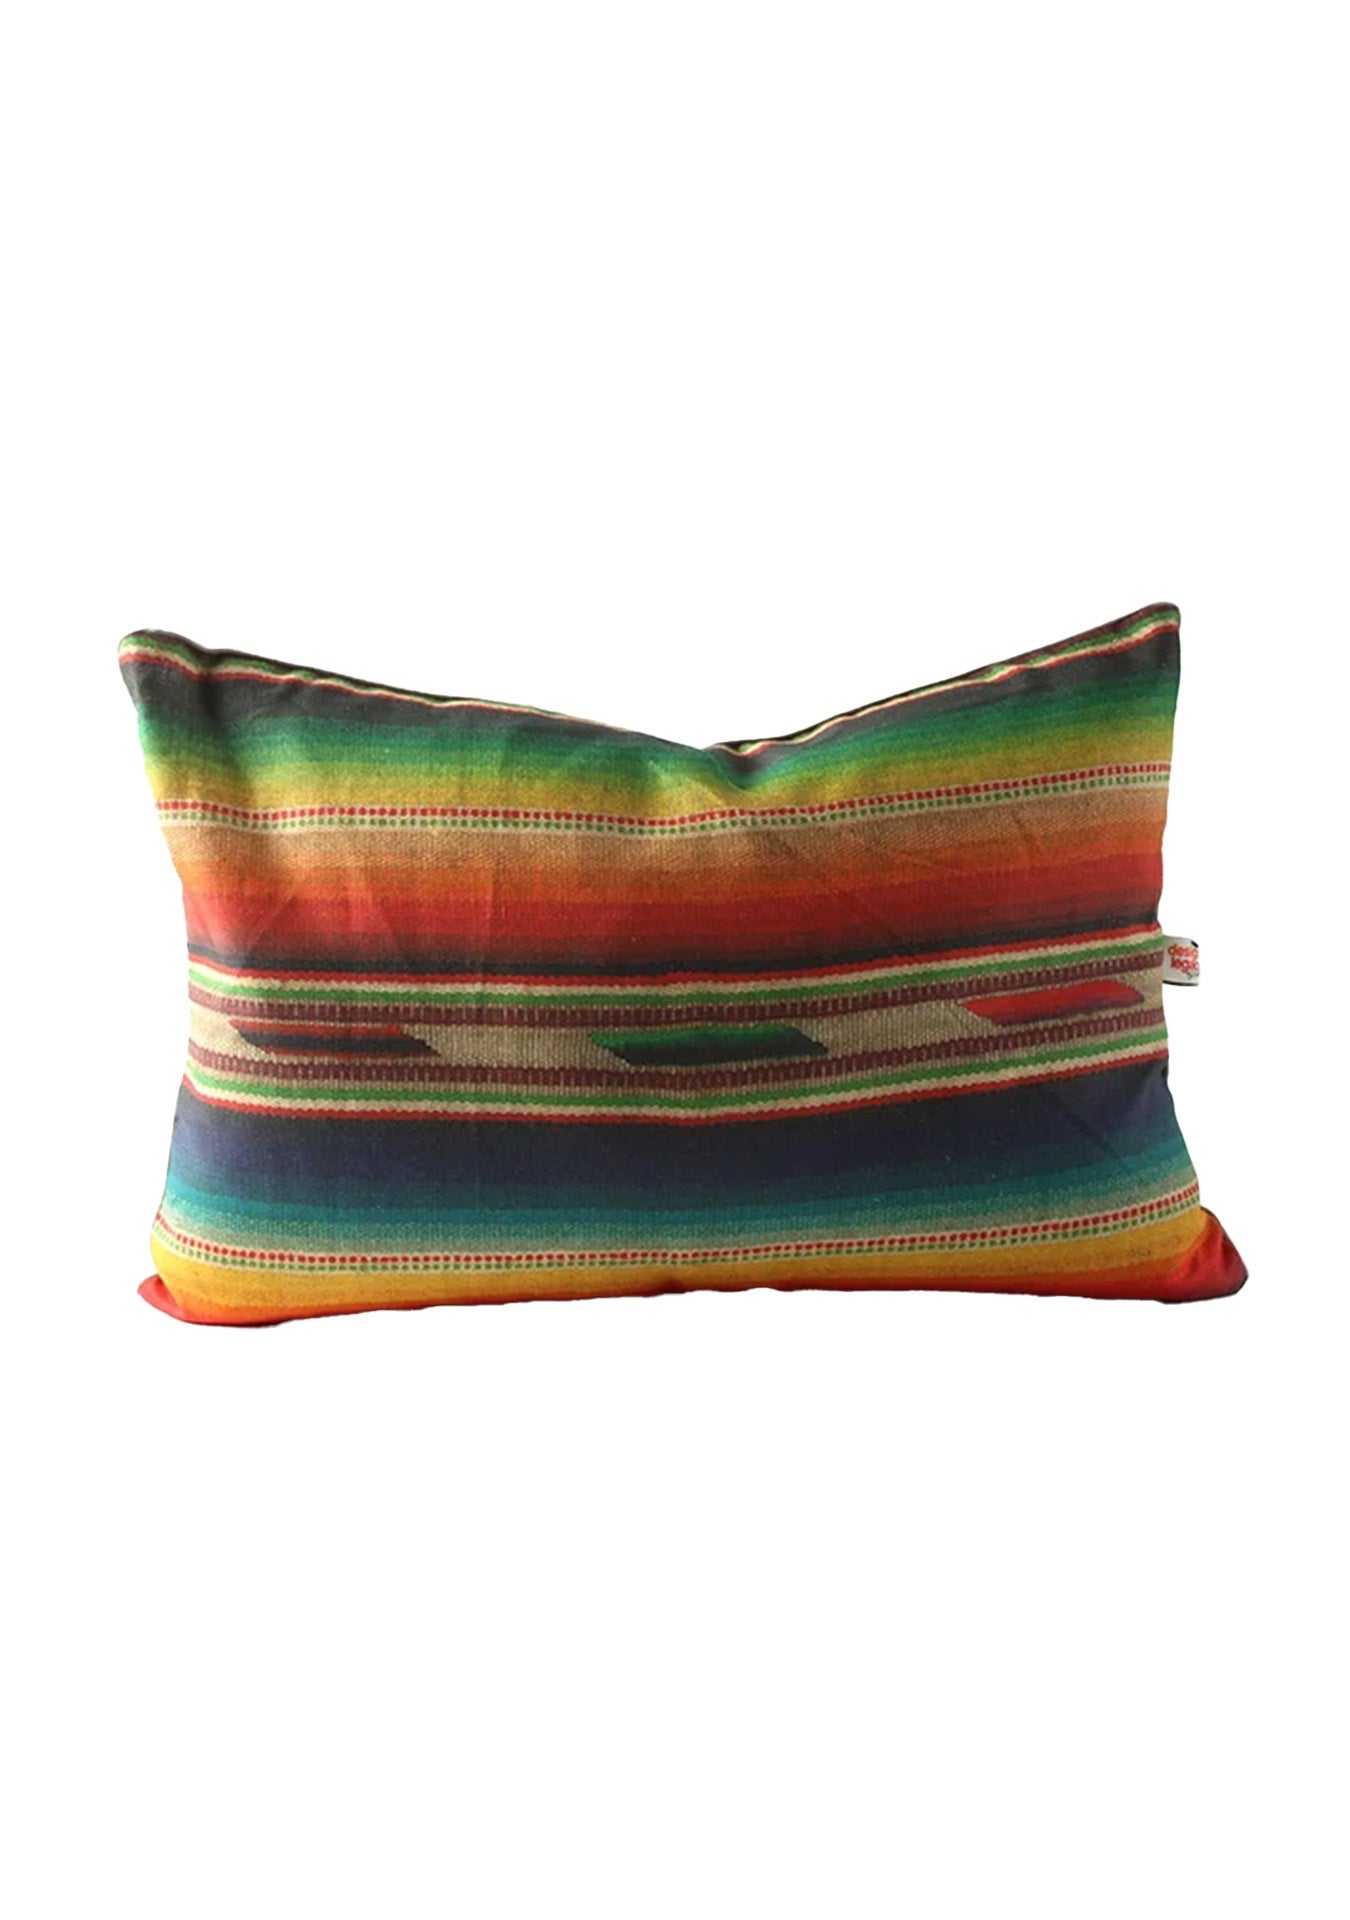 A rectangular pillow with a colorful striped pattern in Arizona style, displayed against a white background. - A SW Multi Colored Serape 17x24 pillow by Design Legacy, displayed against a white background.